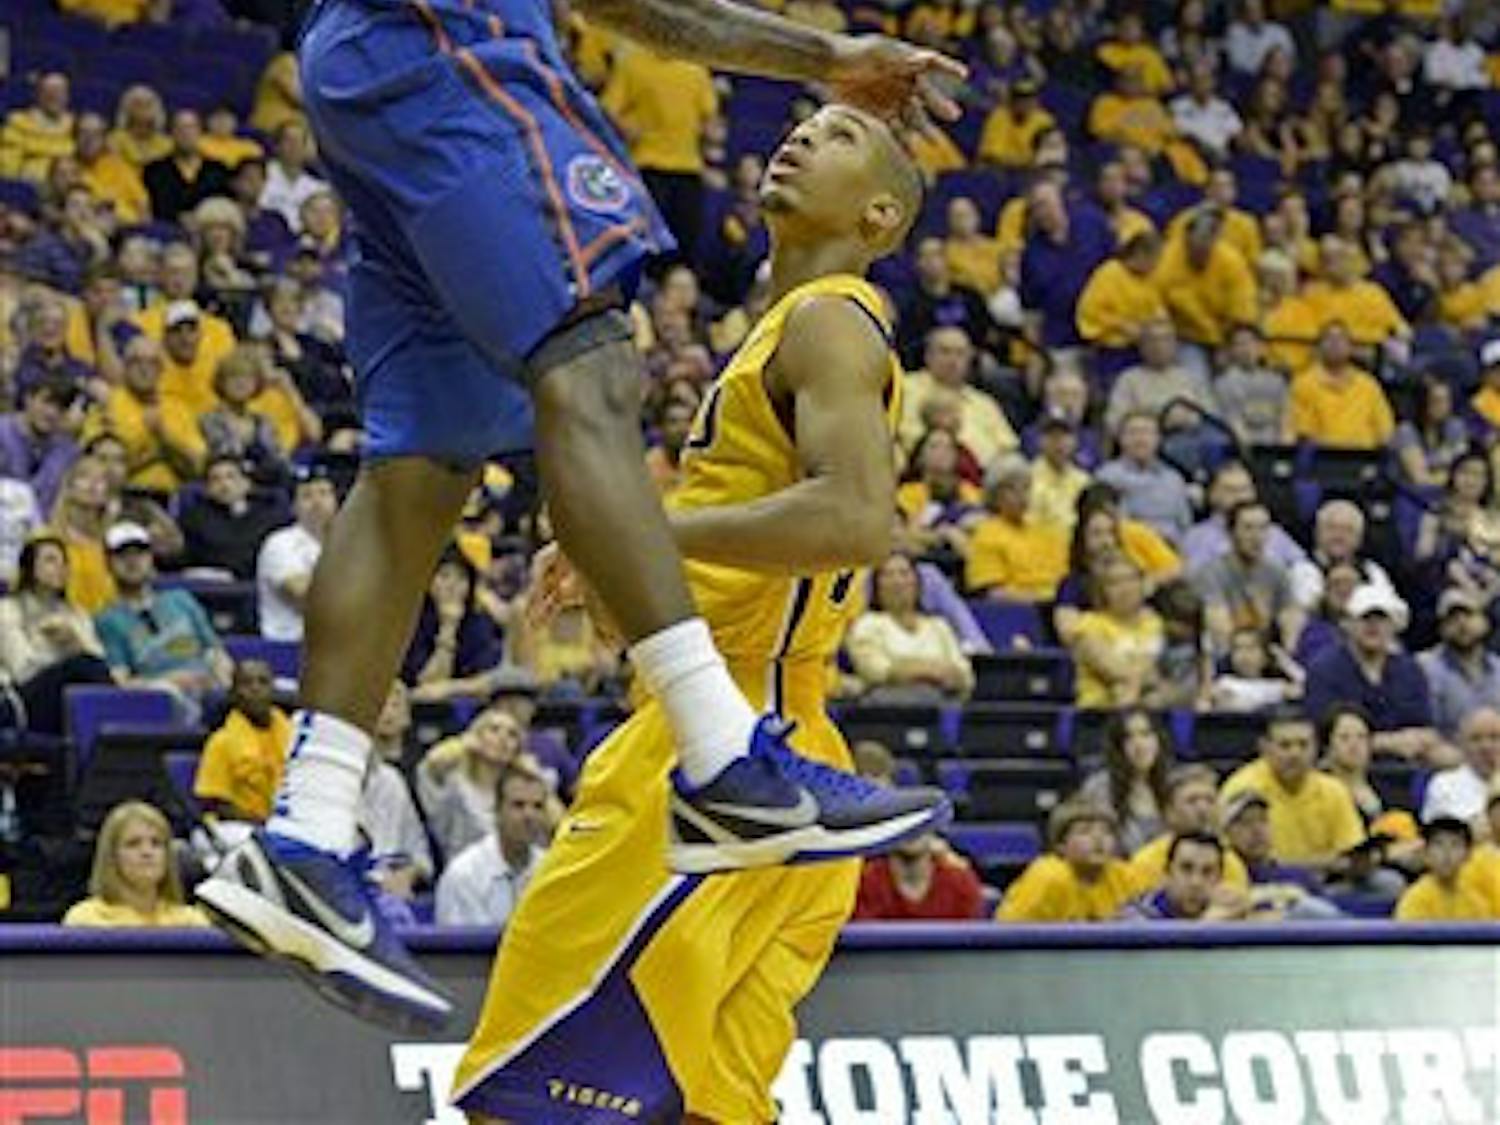 Florida guard Kenny Boynton, top, dunks the ball in front of LSU guard Charles Carmouche during the second half of an NCAA college basketball game at the Pete Maravich Assembly Center in Baton Rouge, La., Saturday, Jan. 12, 2013. Florida won 74-52.(AP Photo/Bill Feig)